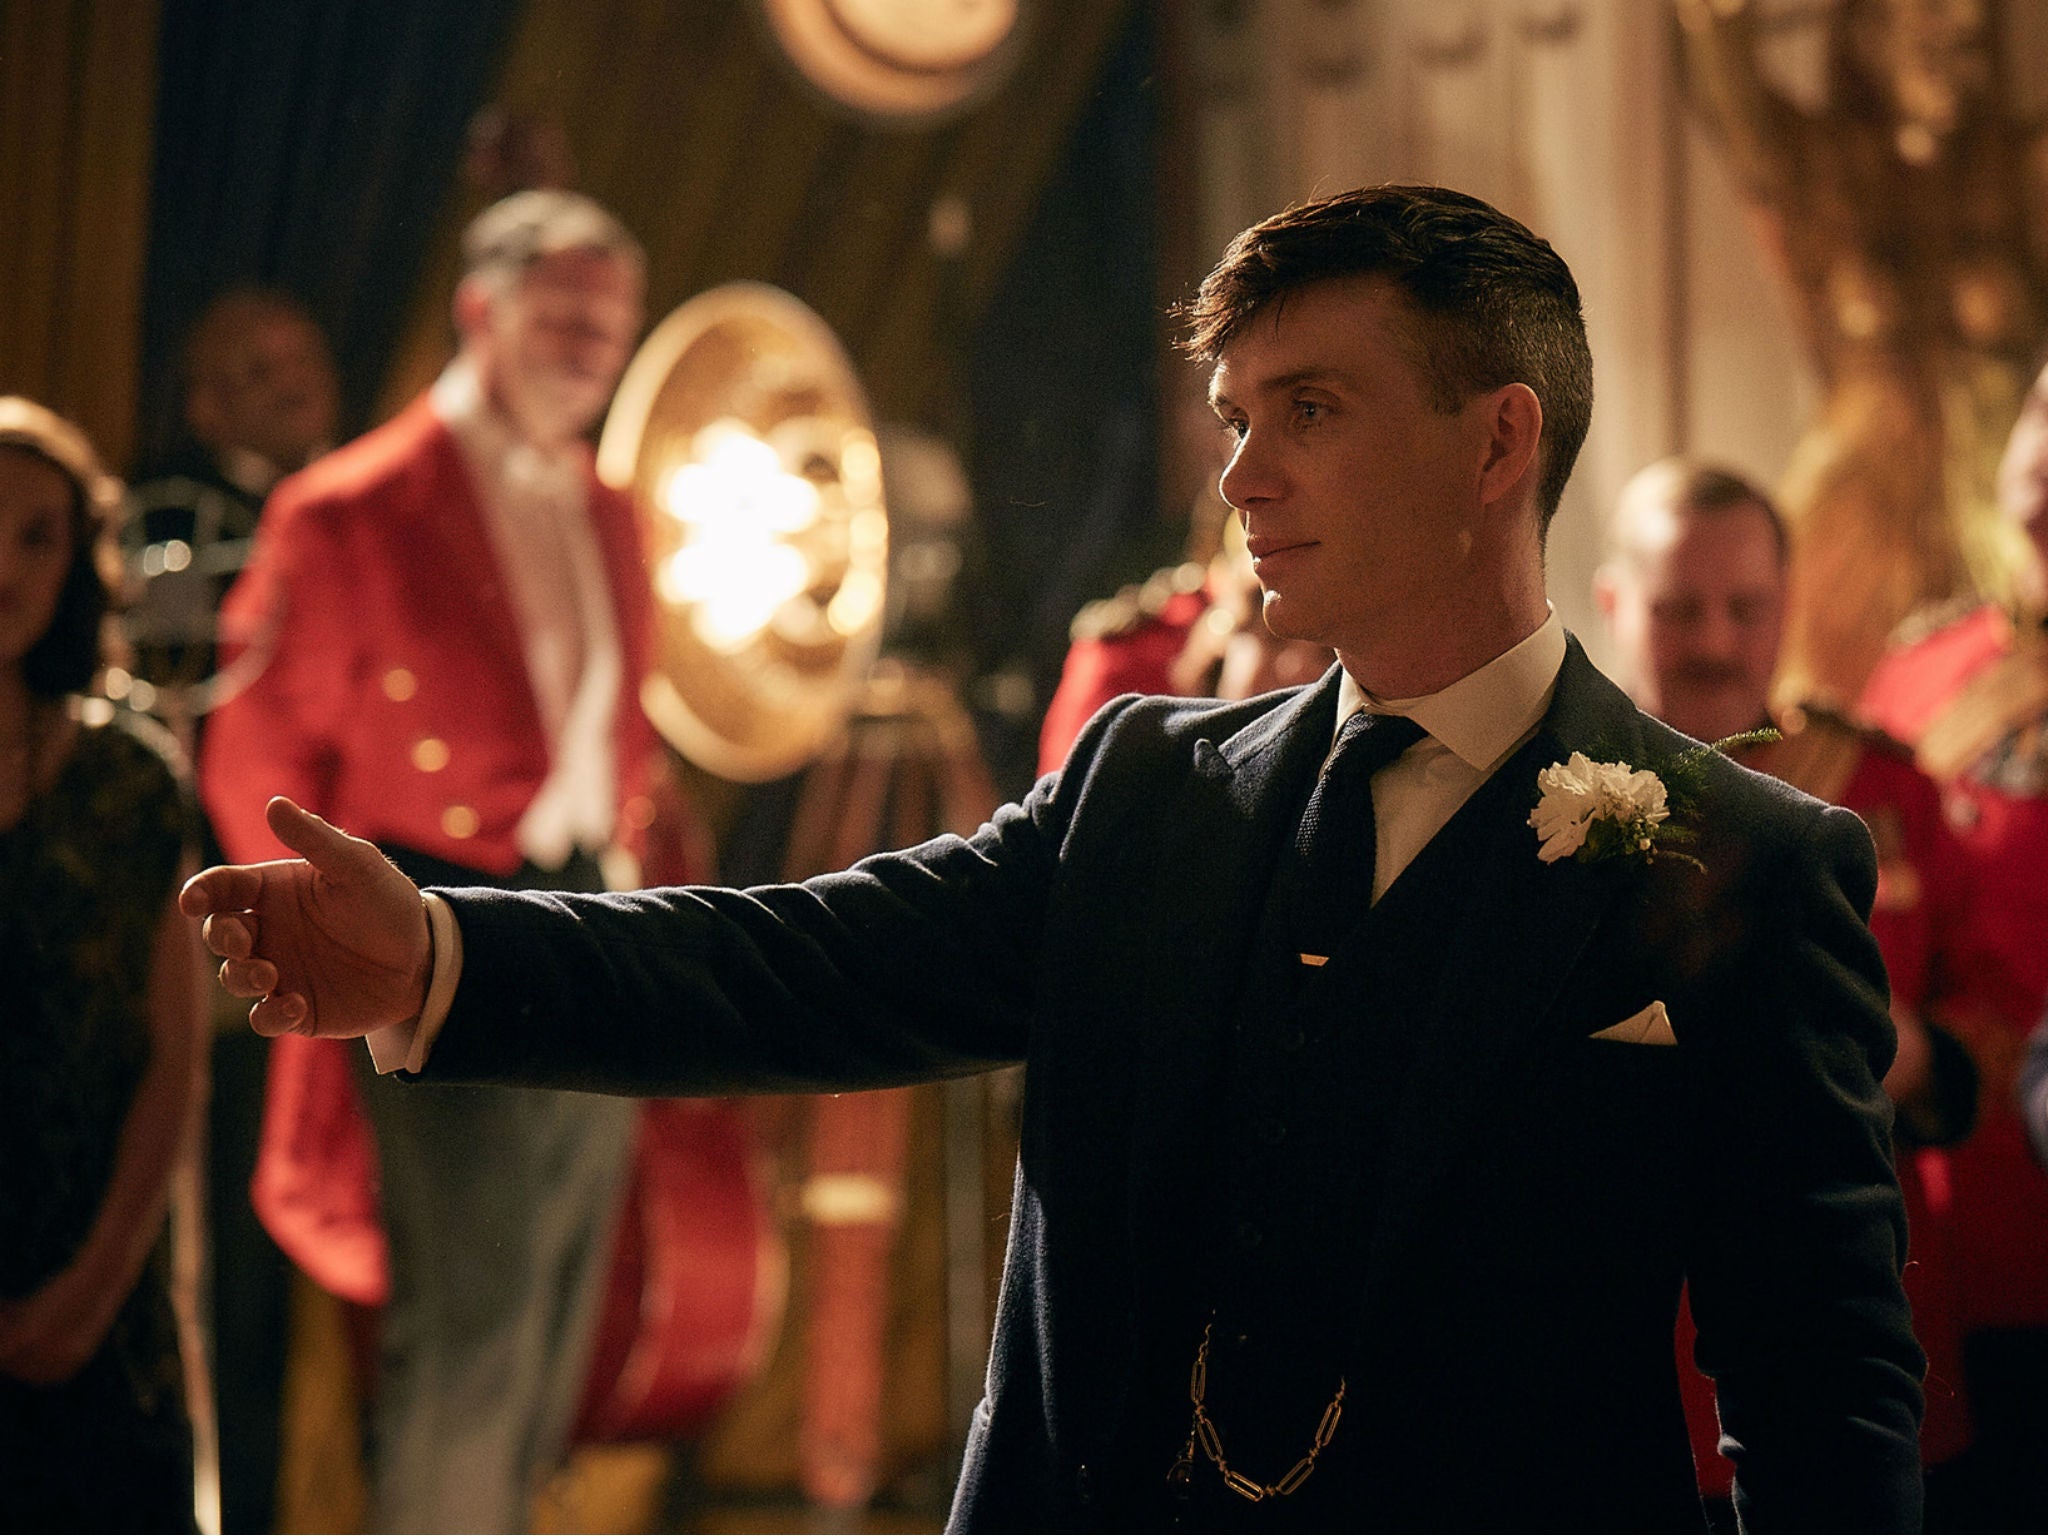 Tommy Shelby's bride walks down the aisle to be married - but is it Grace, May or another woman altogether?